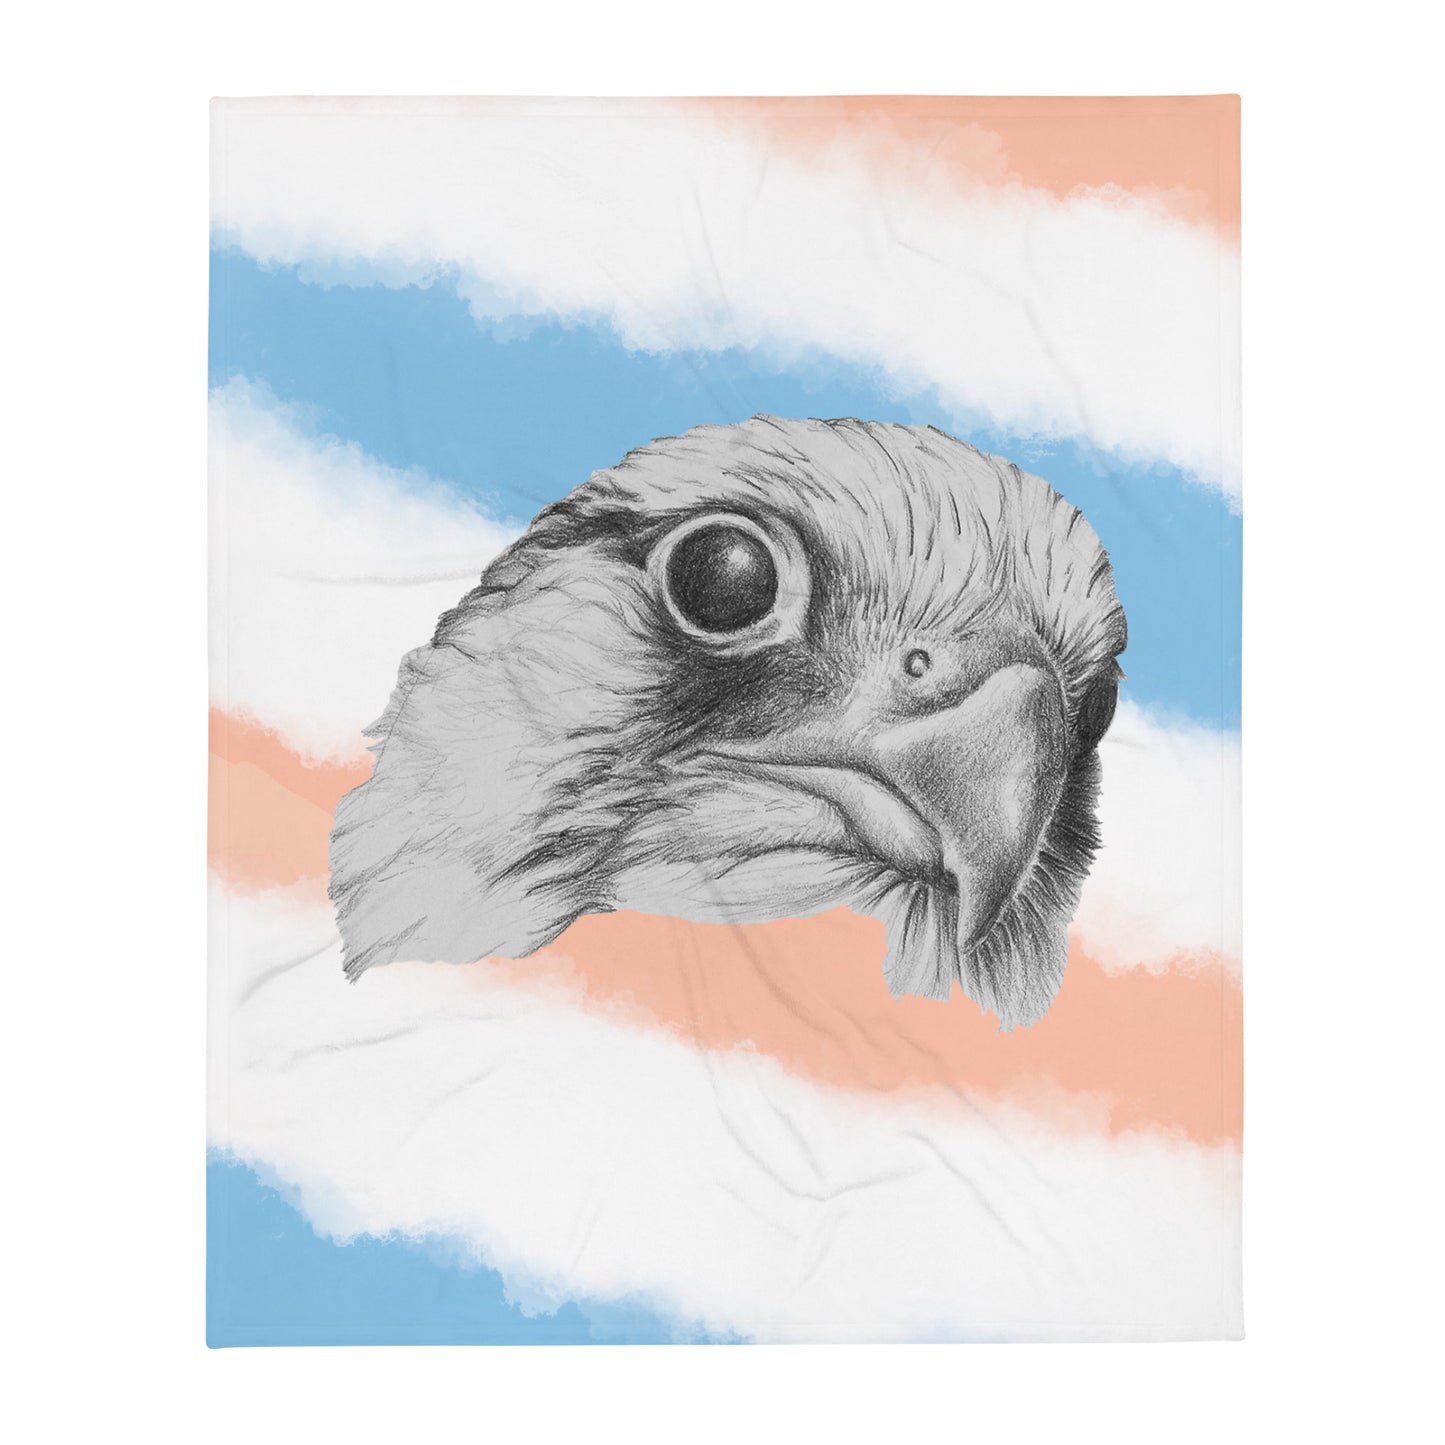 These "Hawk Canvas Wall Hangings" are from a drawing of mine created with a graphite pencil. It has been digitally optimized and transferred to a 100% Polyester throw blanket.